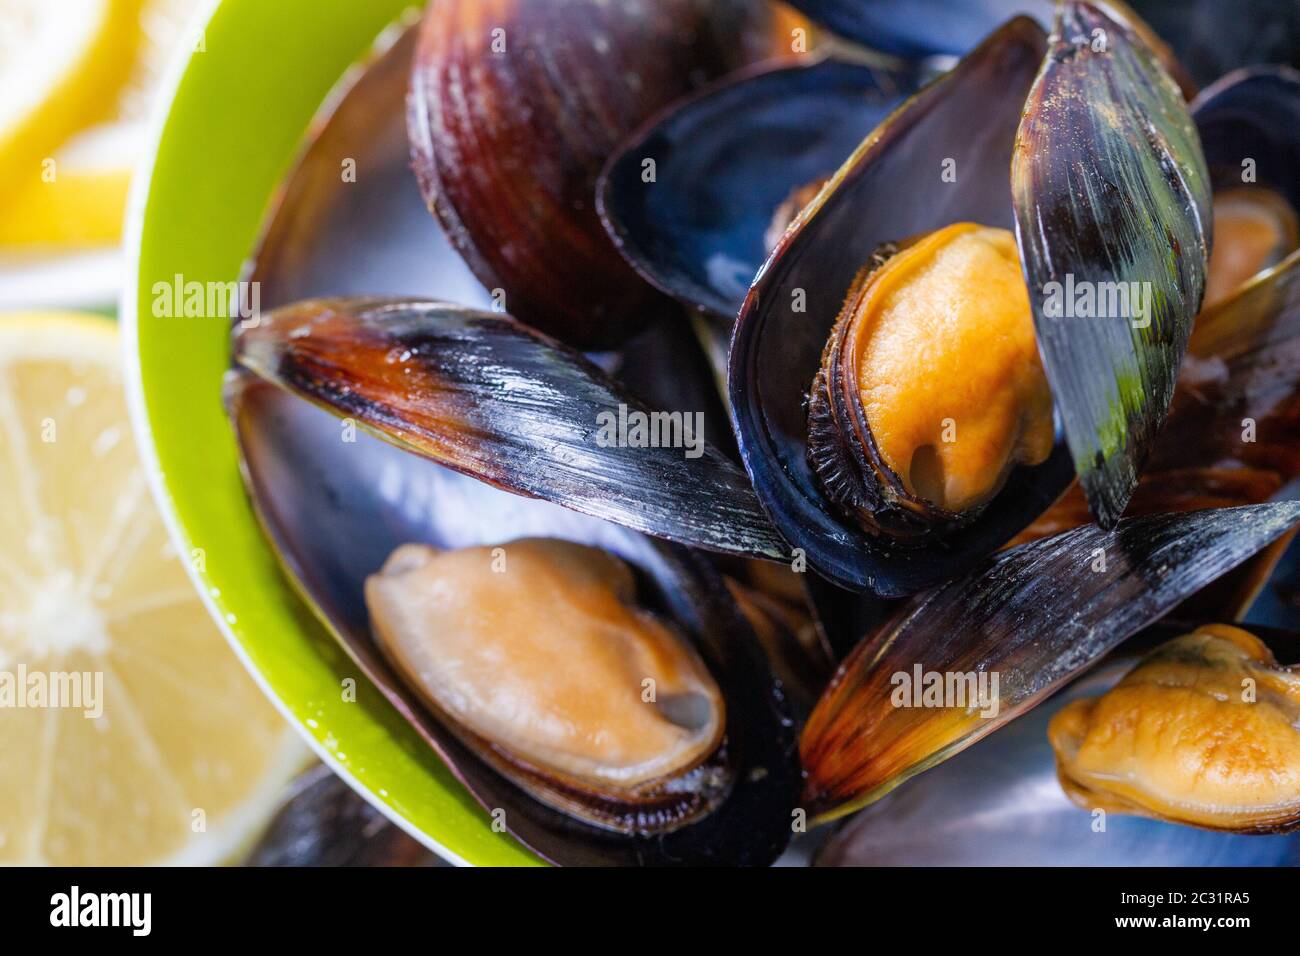 Cooked mussels served on a plate Stock Photo